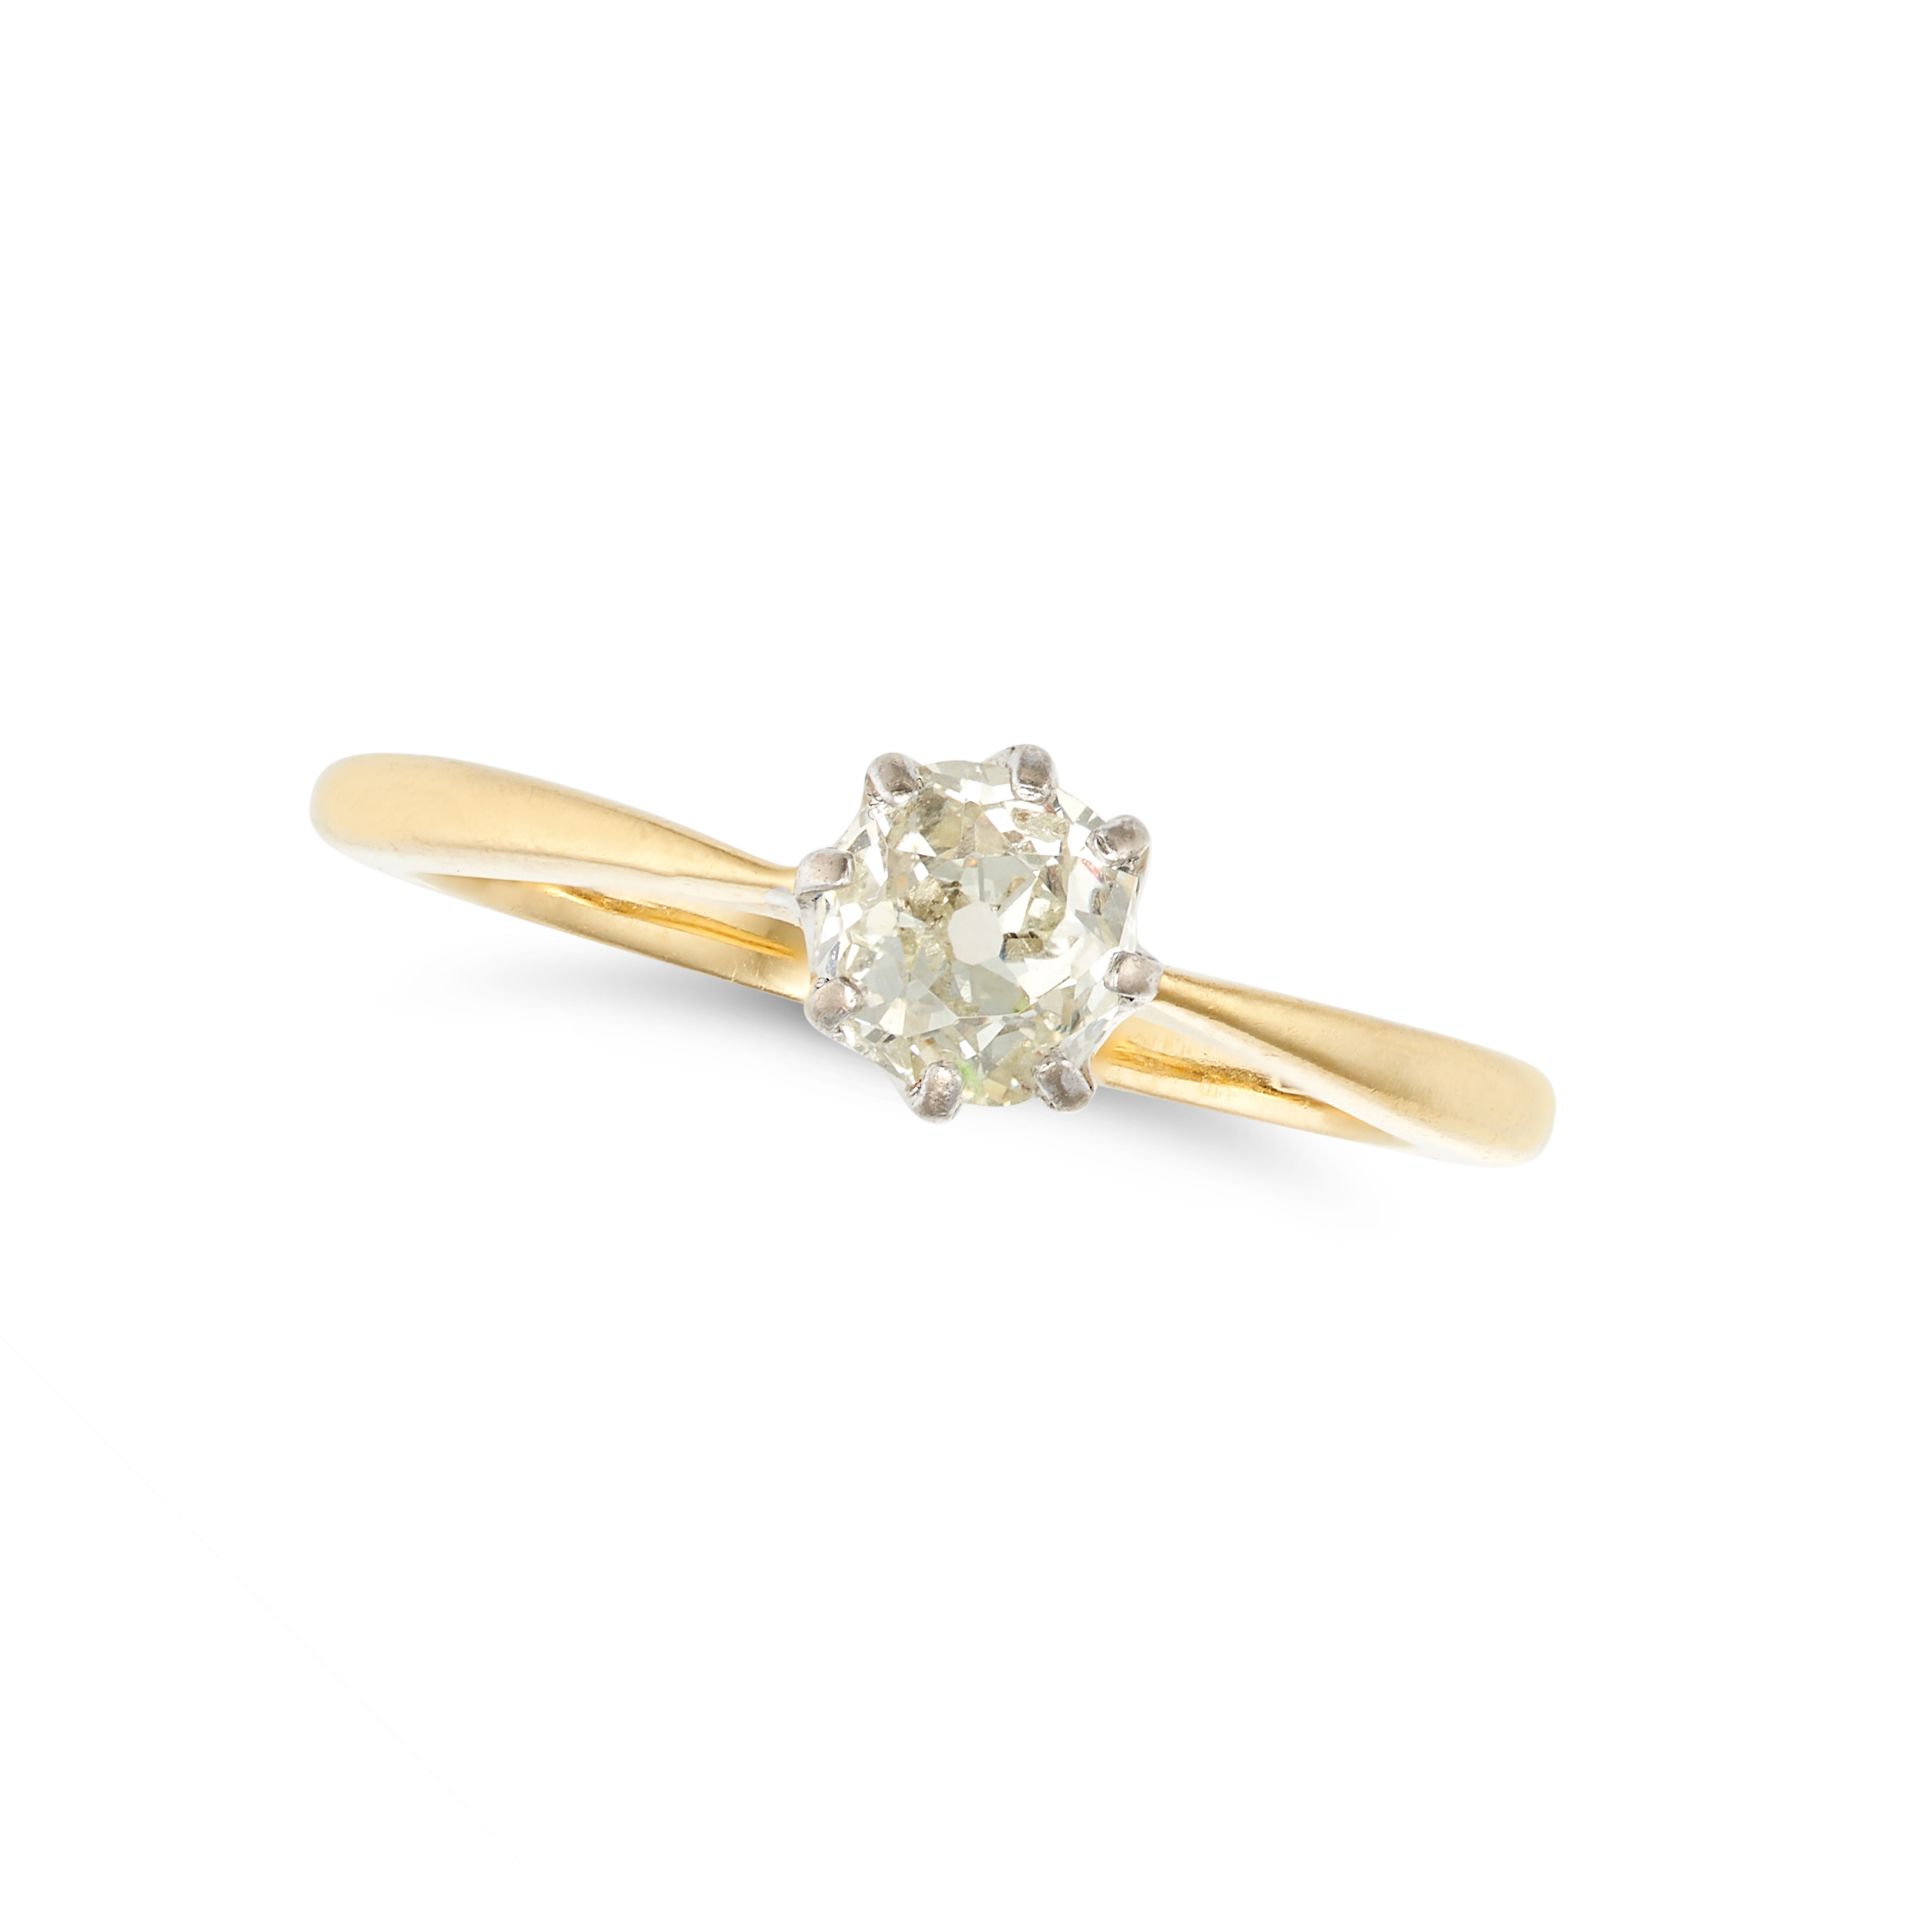 NO RESERVE - A SOLITAIRE DIAMOND RING in 18ct yellow gold, set with an old cut diamond of approxi...